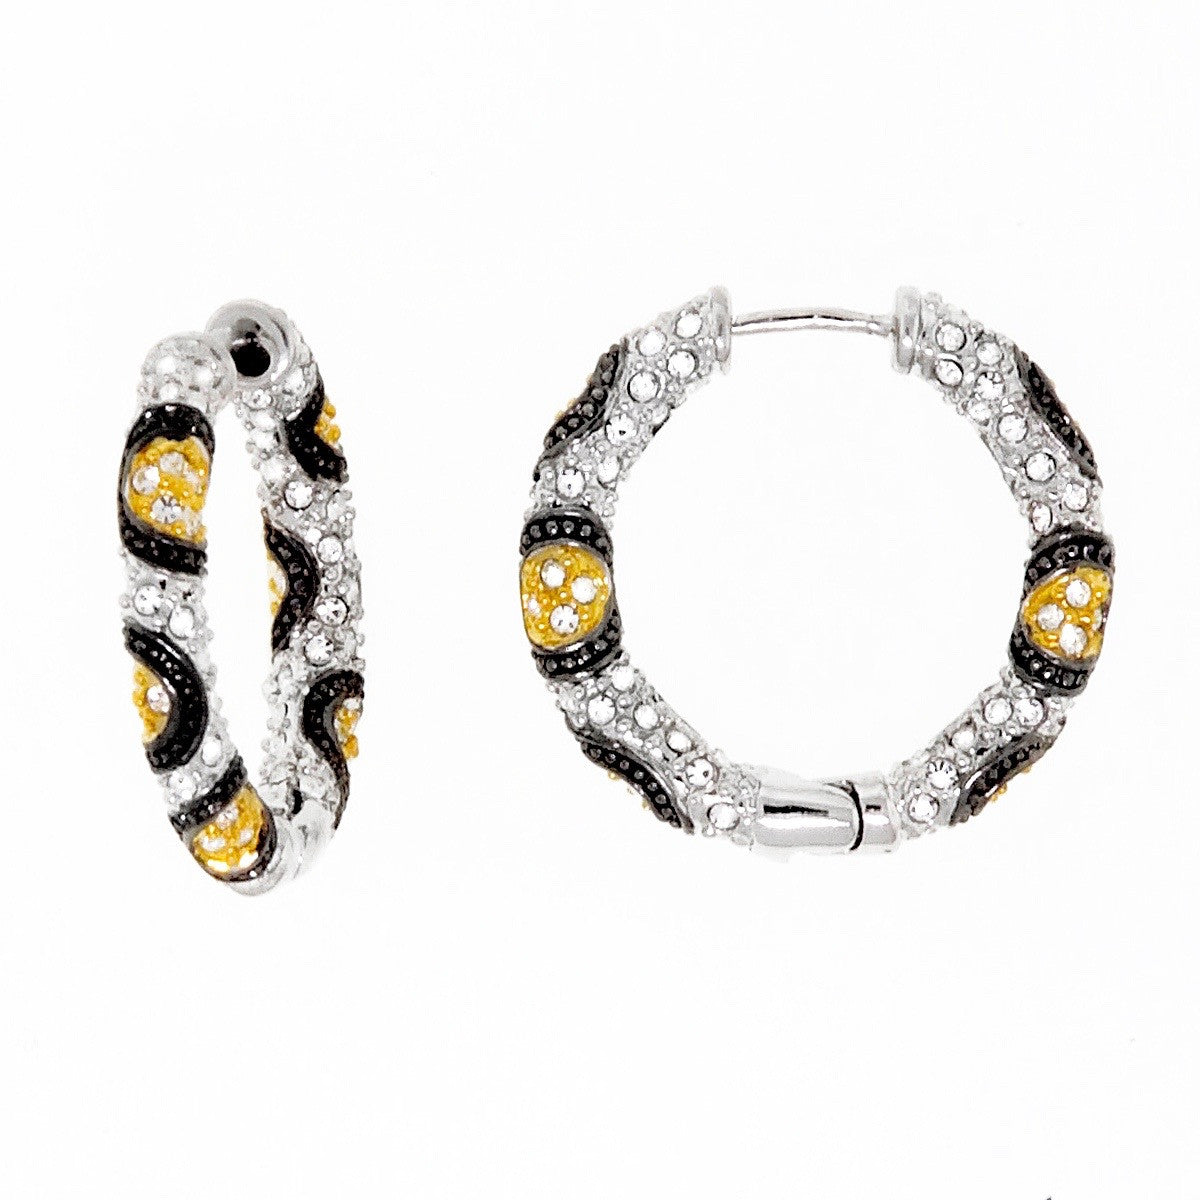 Gold, Black and Clear Swarovski Crystal Hoop Small Earring by Bobby Schandra